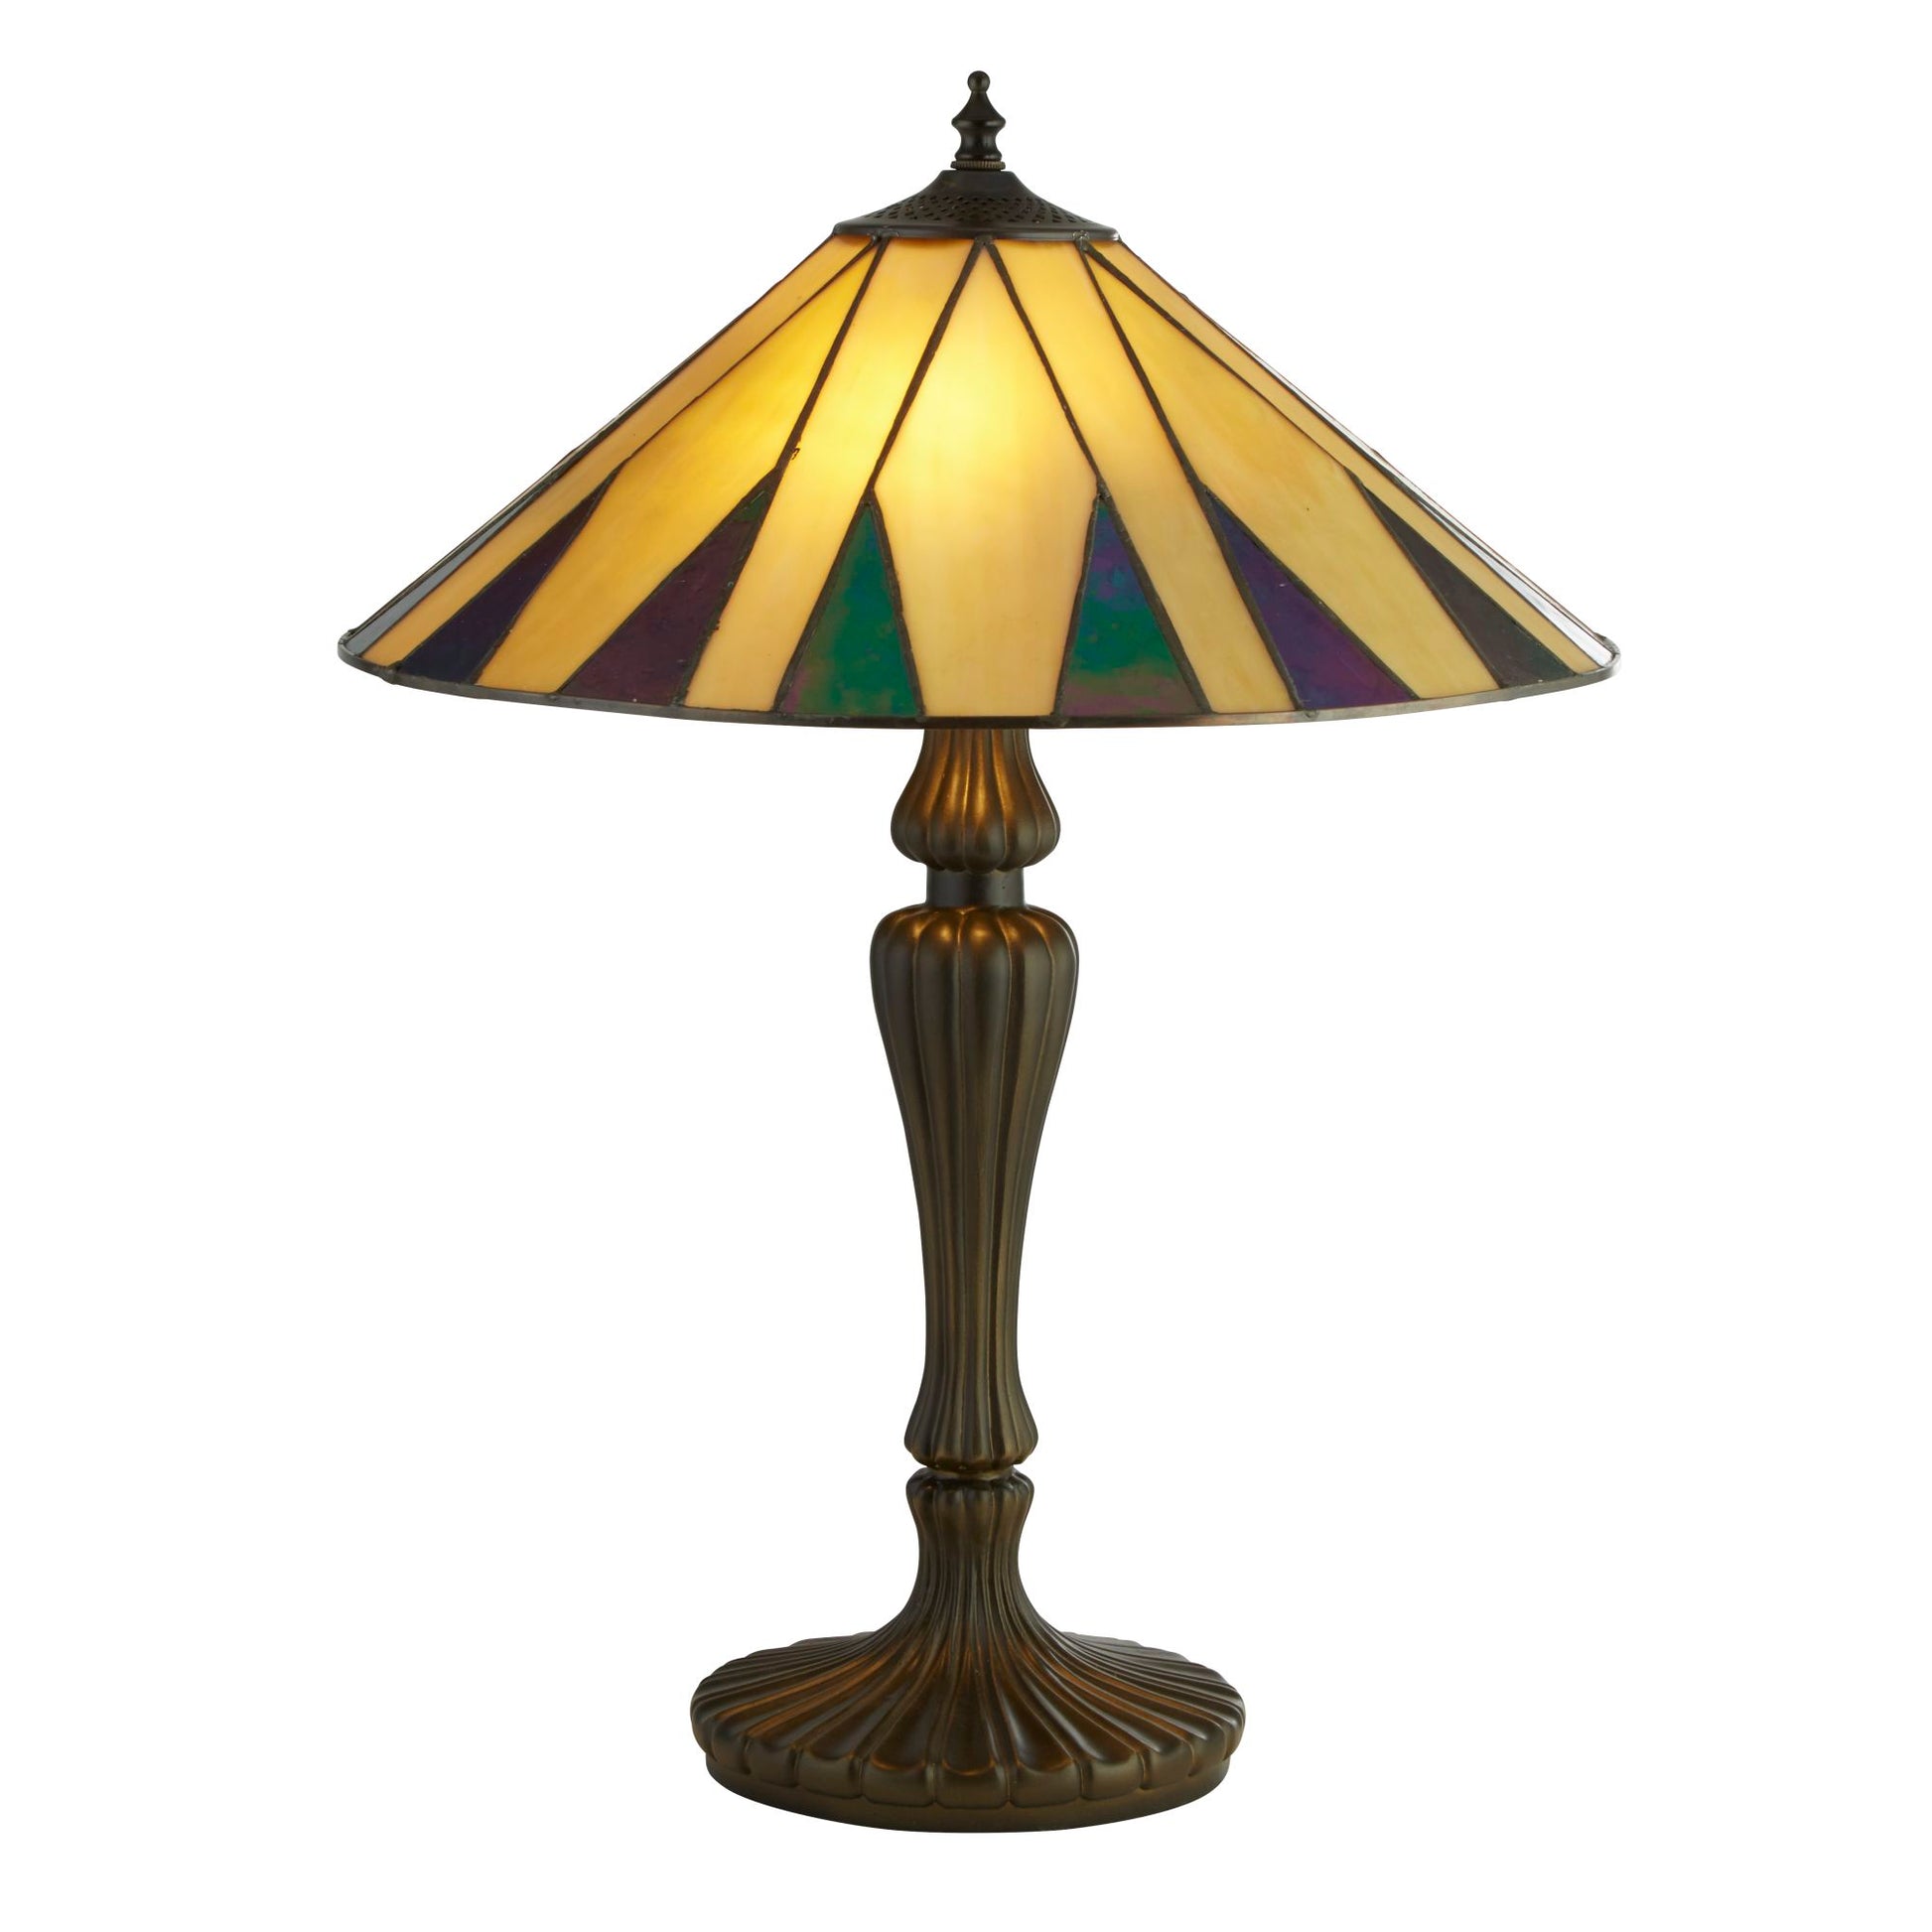 Charleston 56cm Antique Brass Stained Glass Tiffany Table Lamp